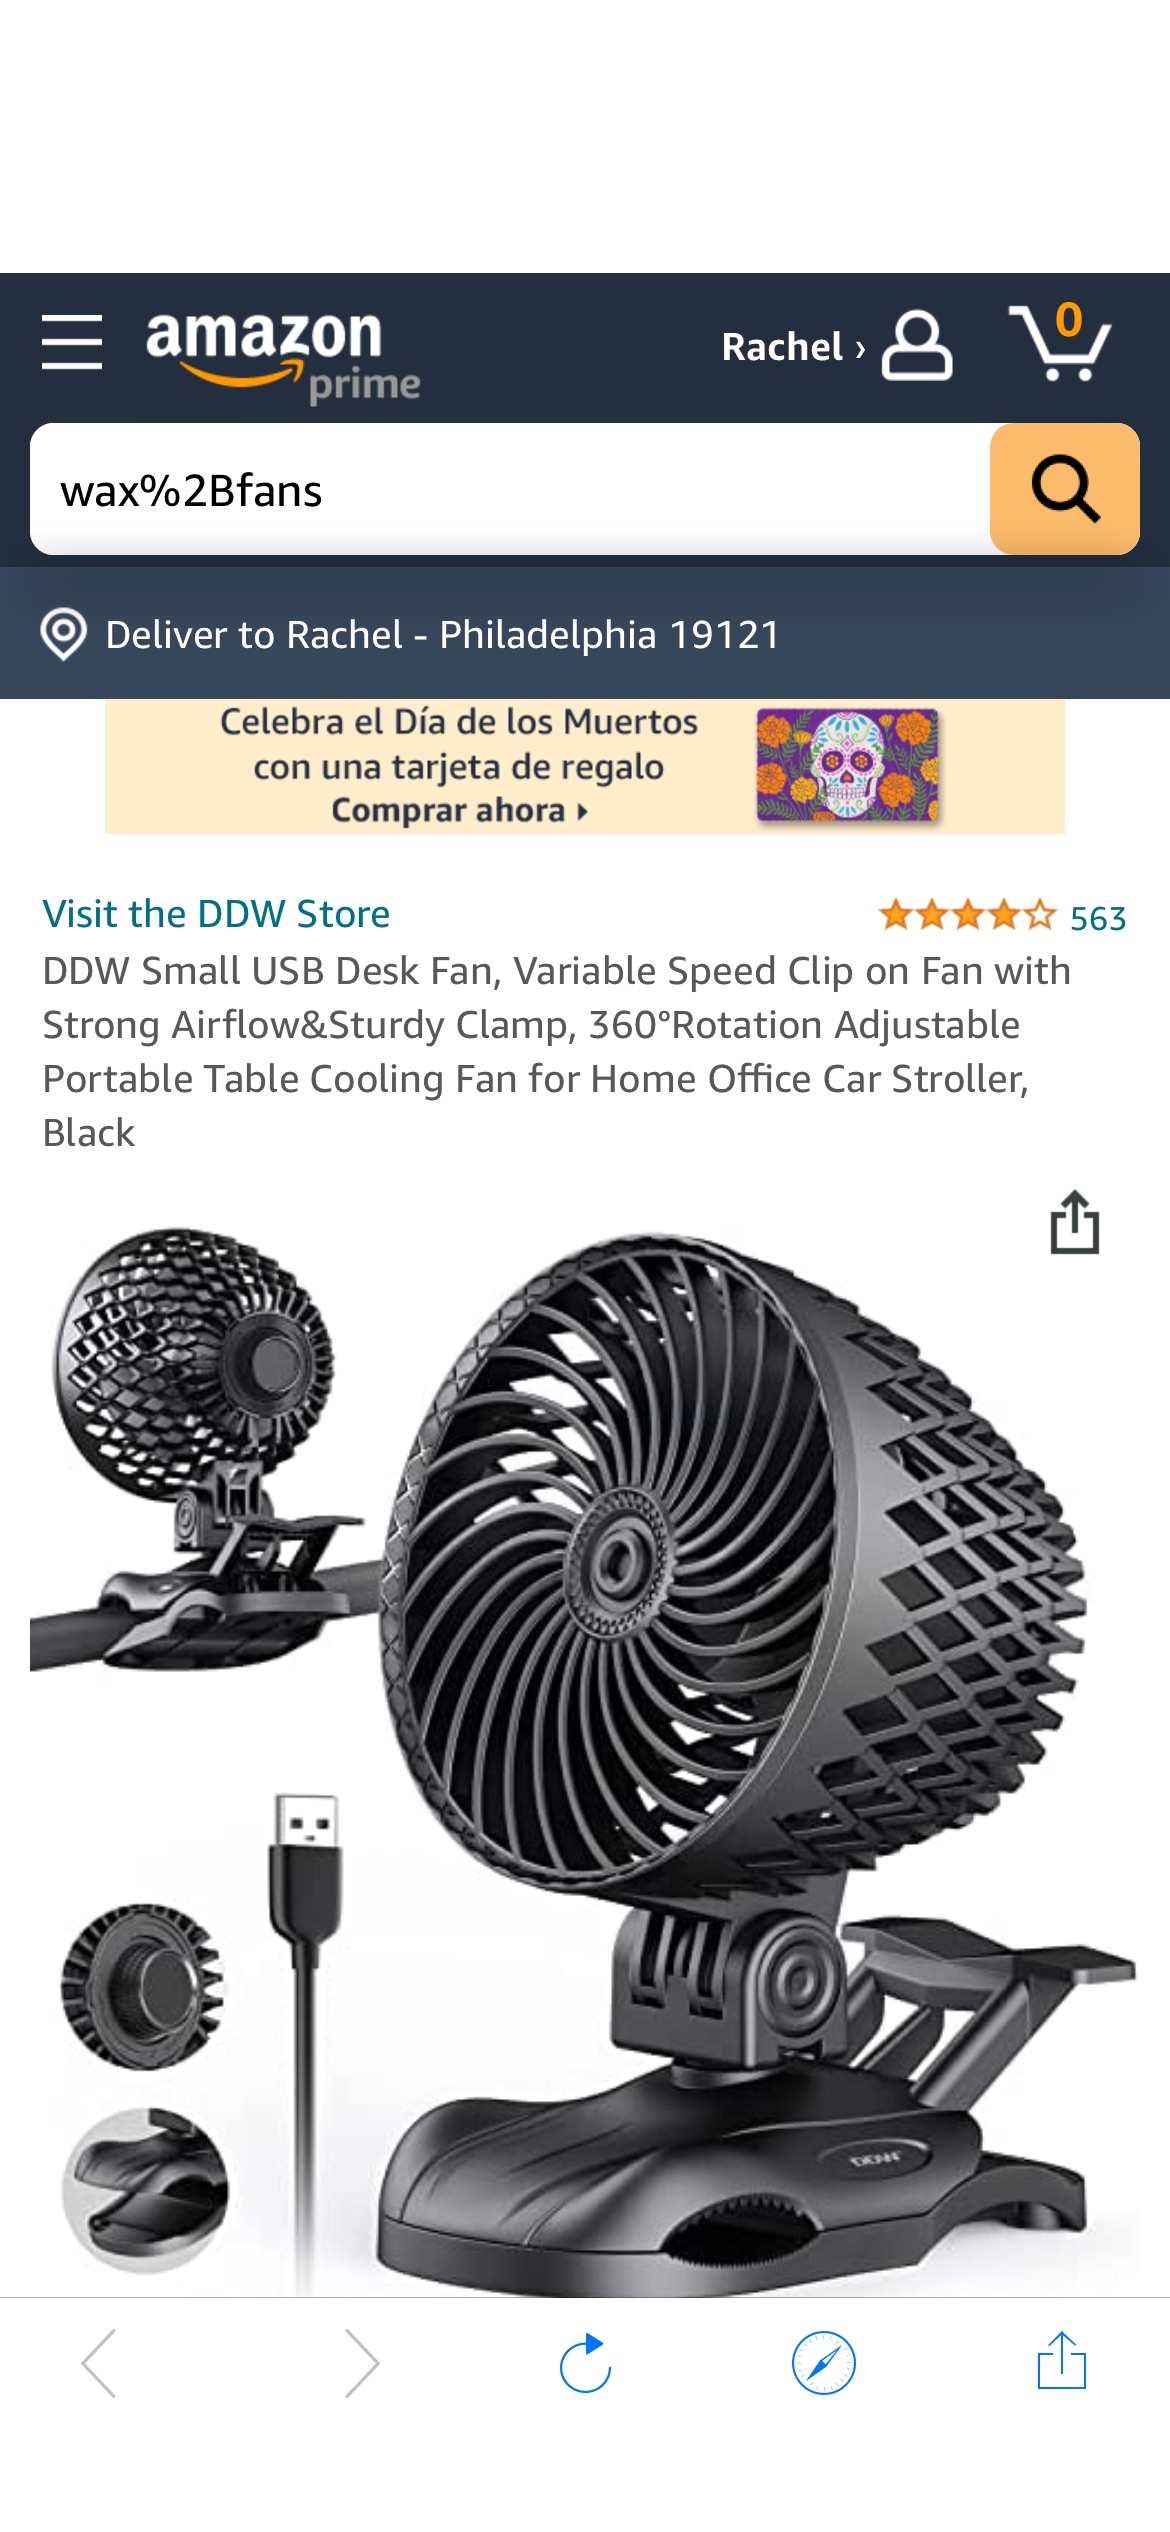 Amazon.com: DDW Small USB Desk Fan, Variable Speed Clip on Fan with Strong Airflow&Sturdy Clamp, 360°Rotation Adjustable